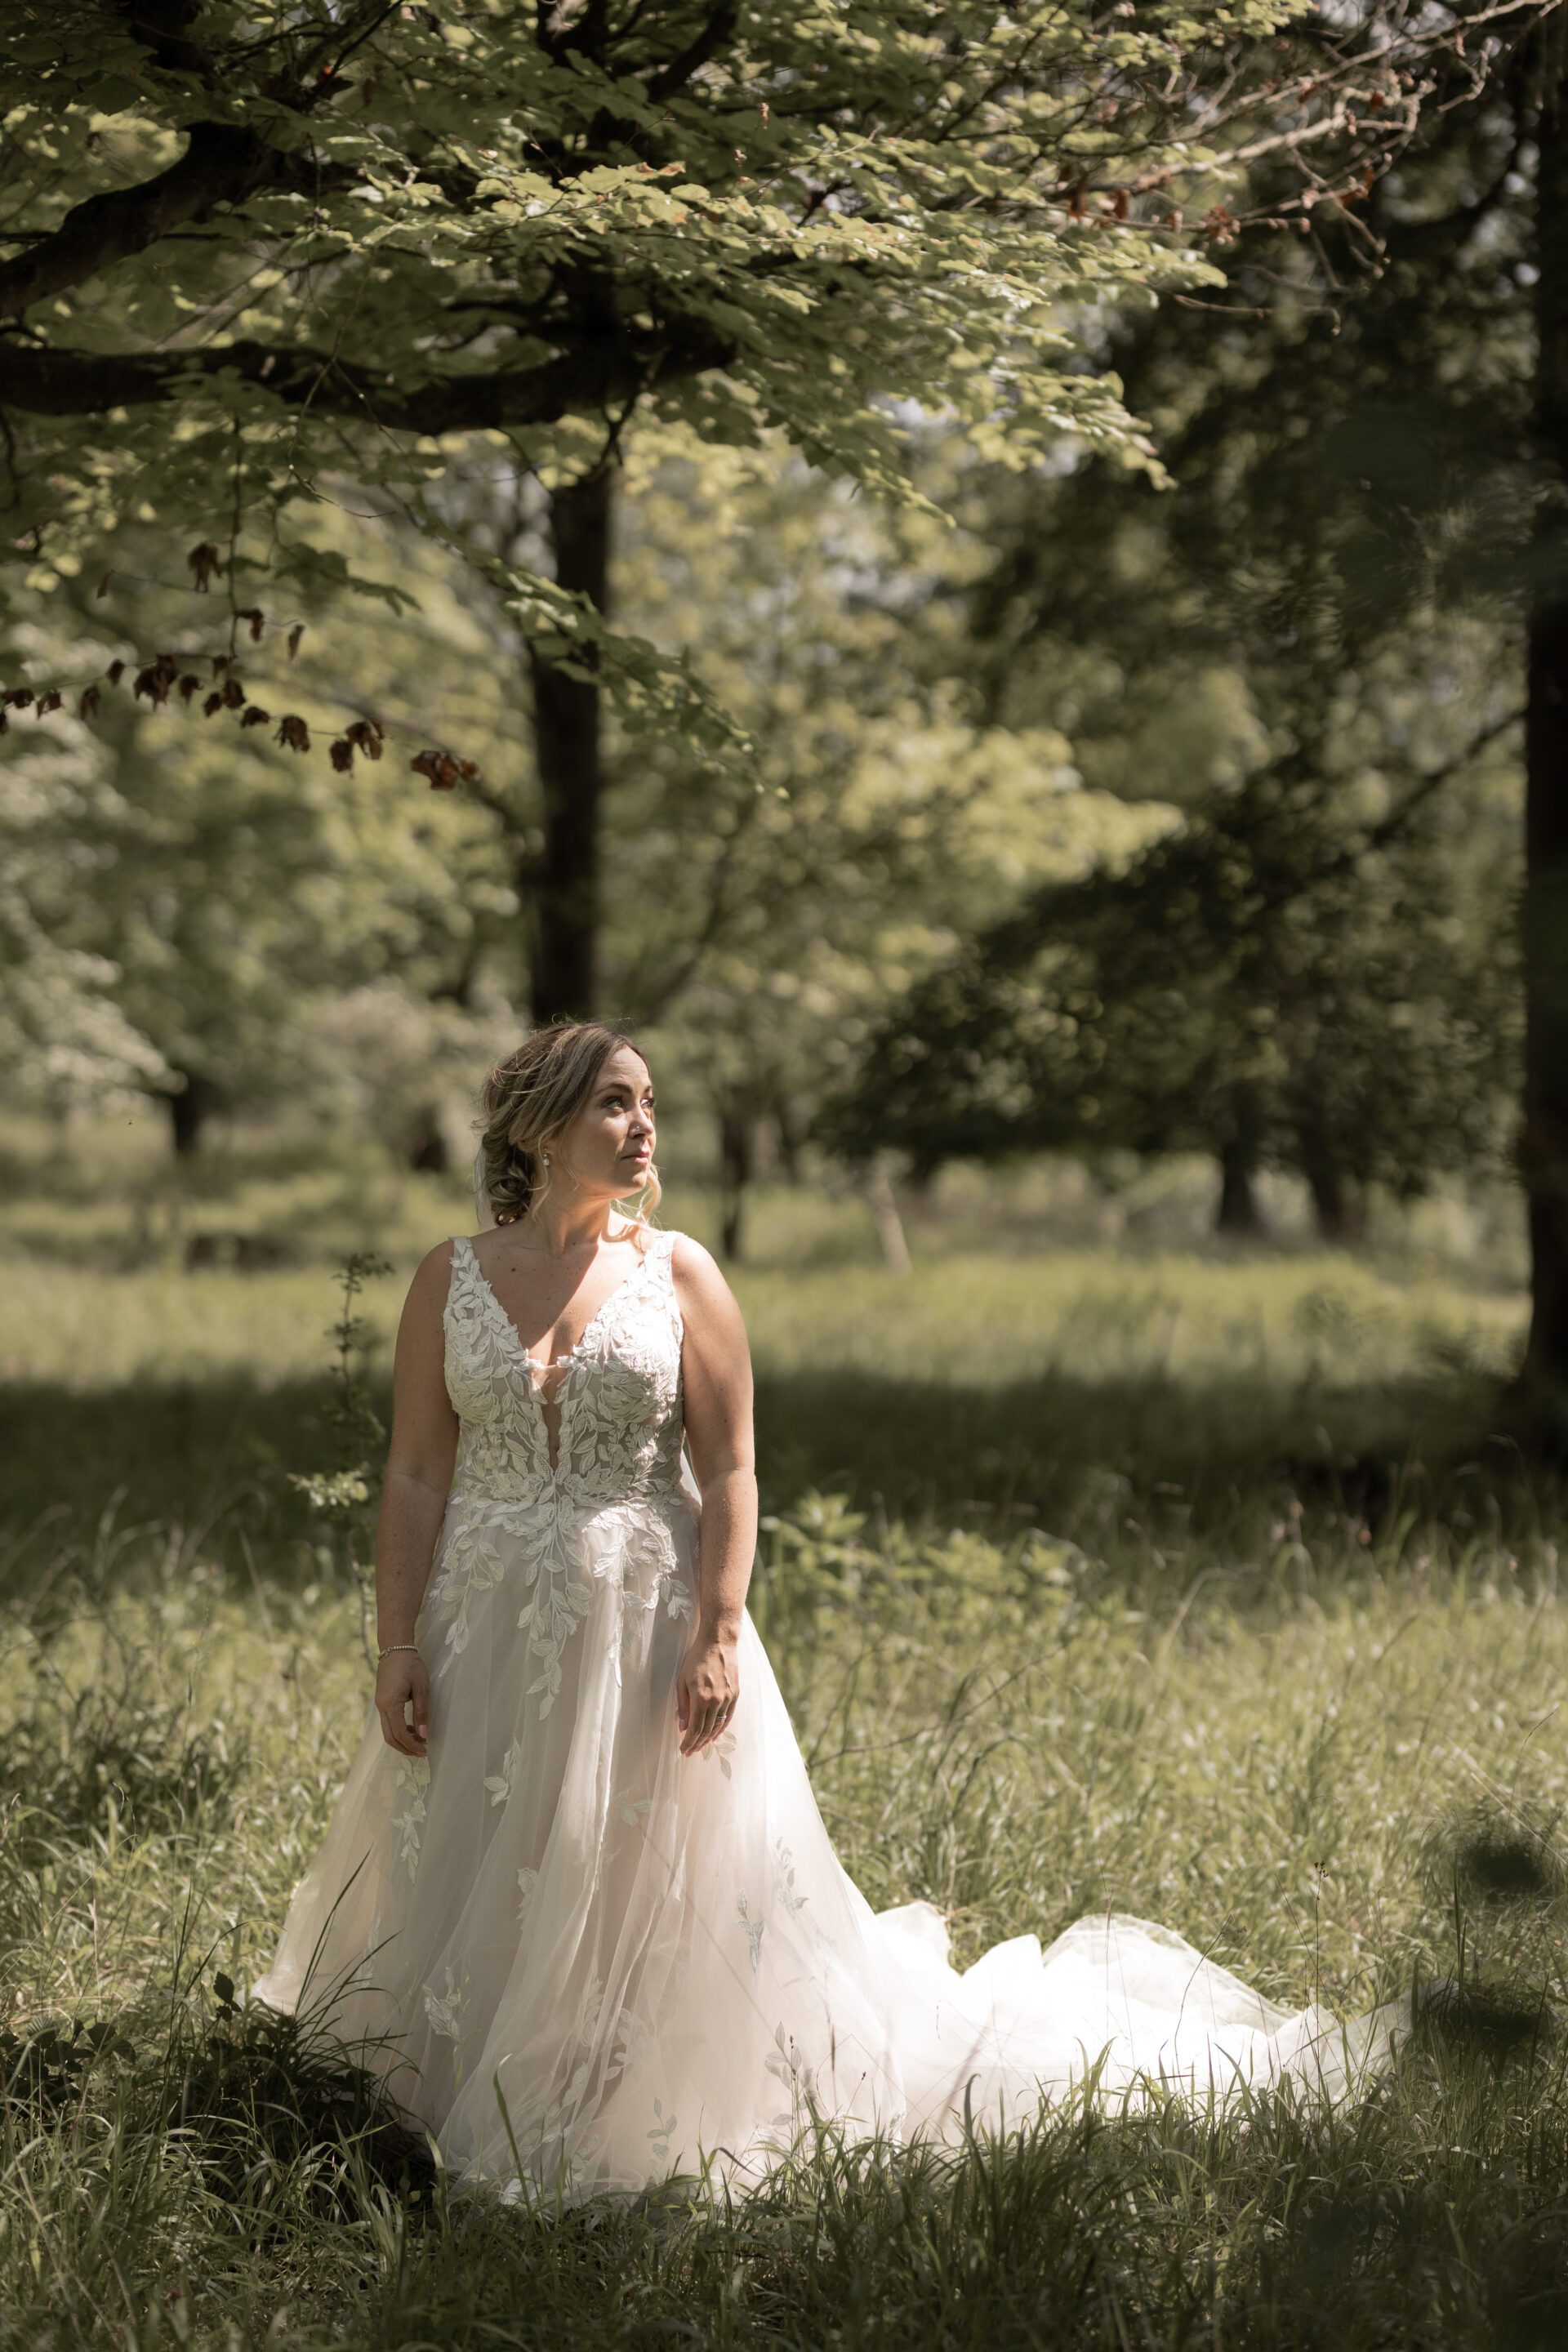 Bridal potrait at Old Luxters Barn in Oxfordshire